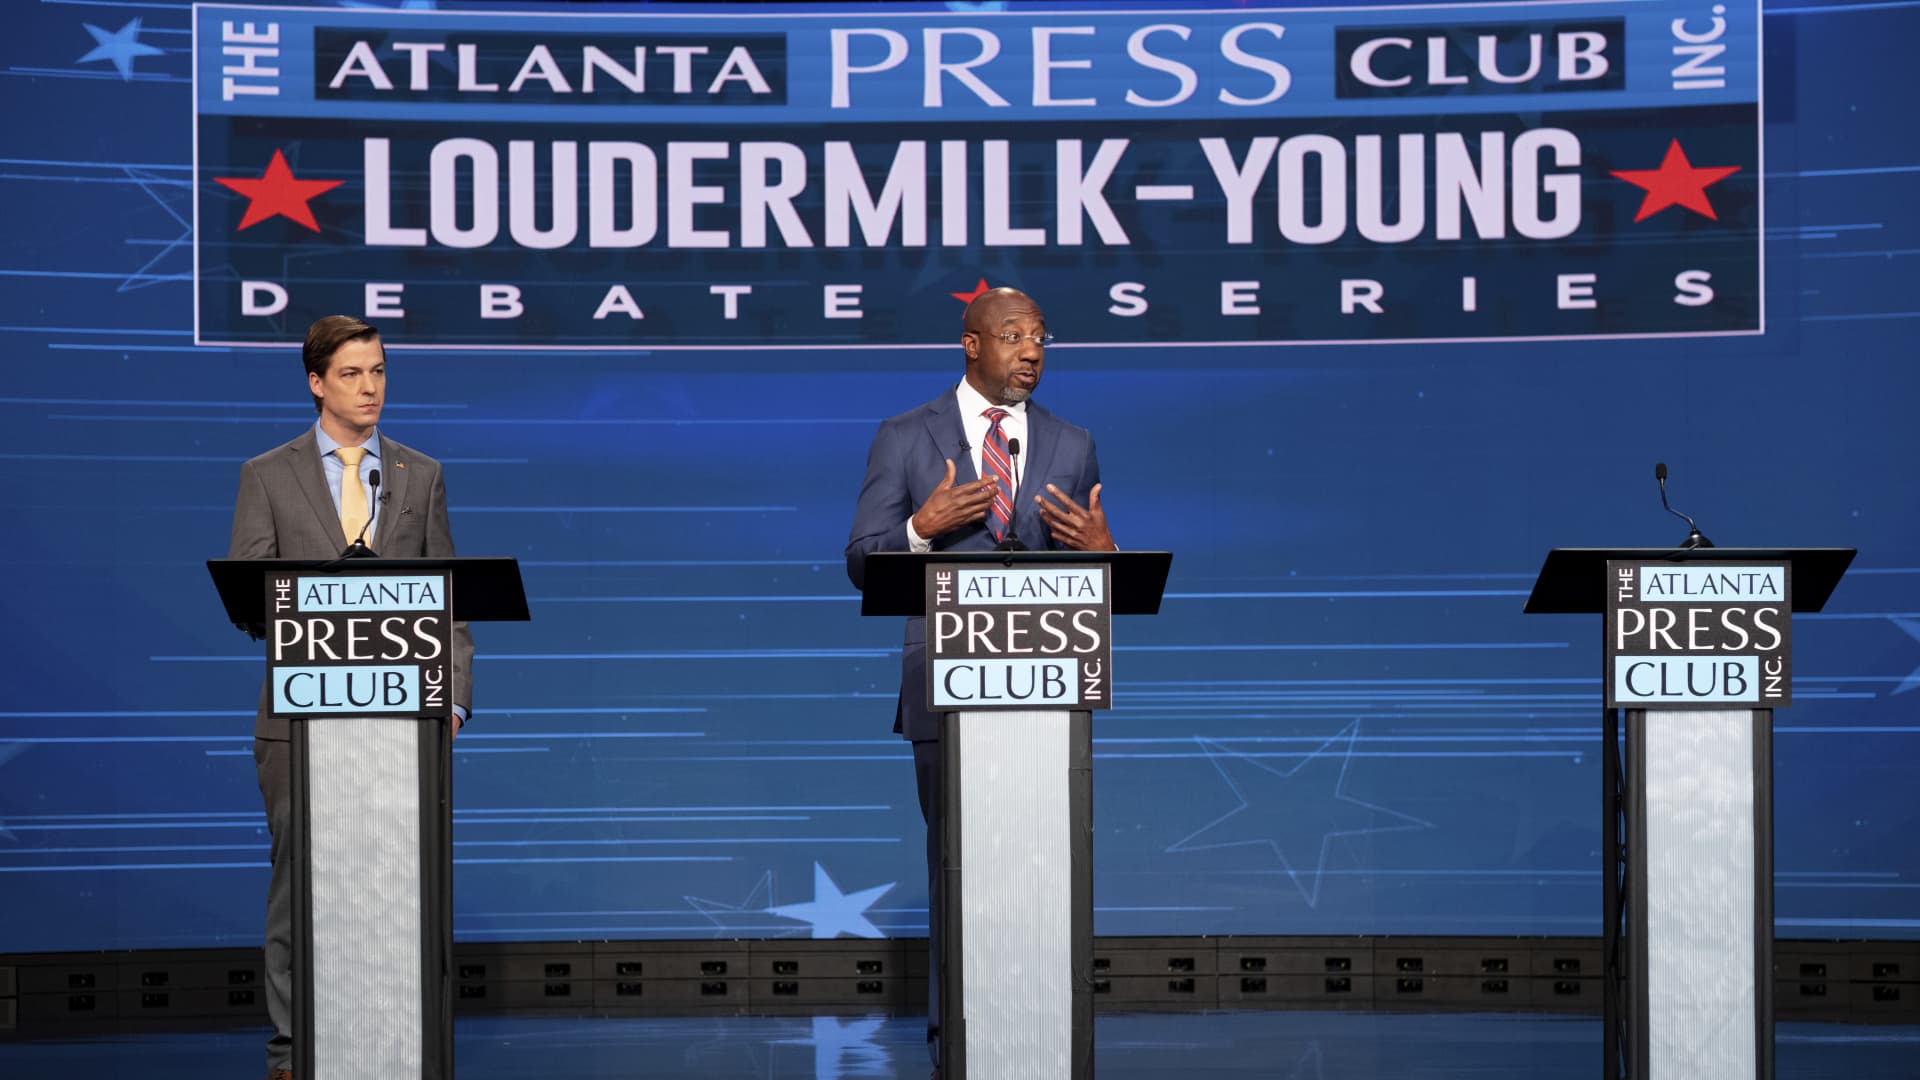 Libertarian challenger Chase Oliver, left, and Sen. Raphael Warnock, D-Ga., participate in a U.S. Senate debate during the Atlanta Press Club Loudermilk-Young Debate Series in Atlanta on Sunday, Oct. 16, 2022. The empty podium at right was for Republican challenger Herschel Walker, who was invited but did not attend.